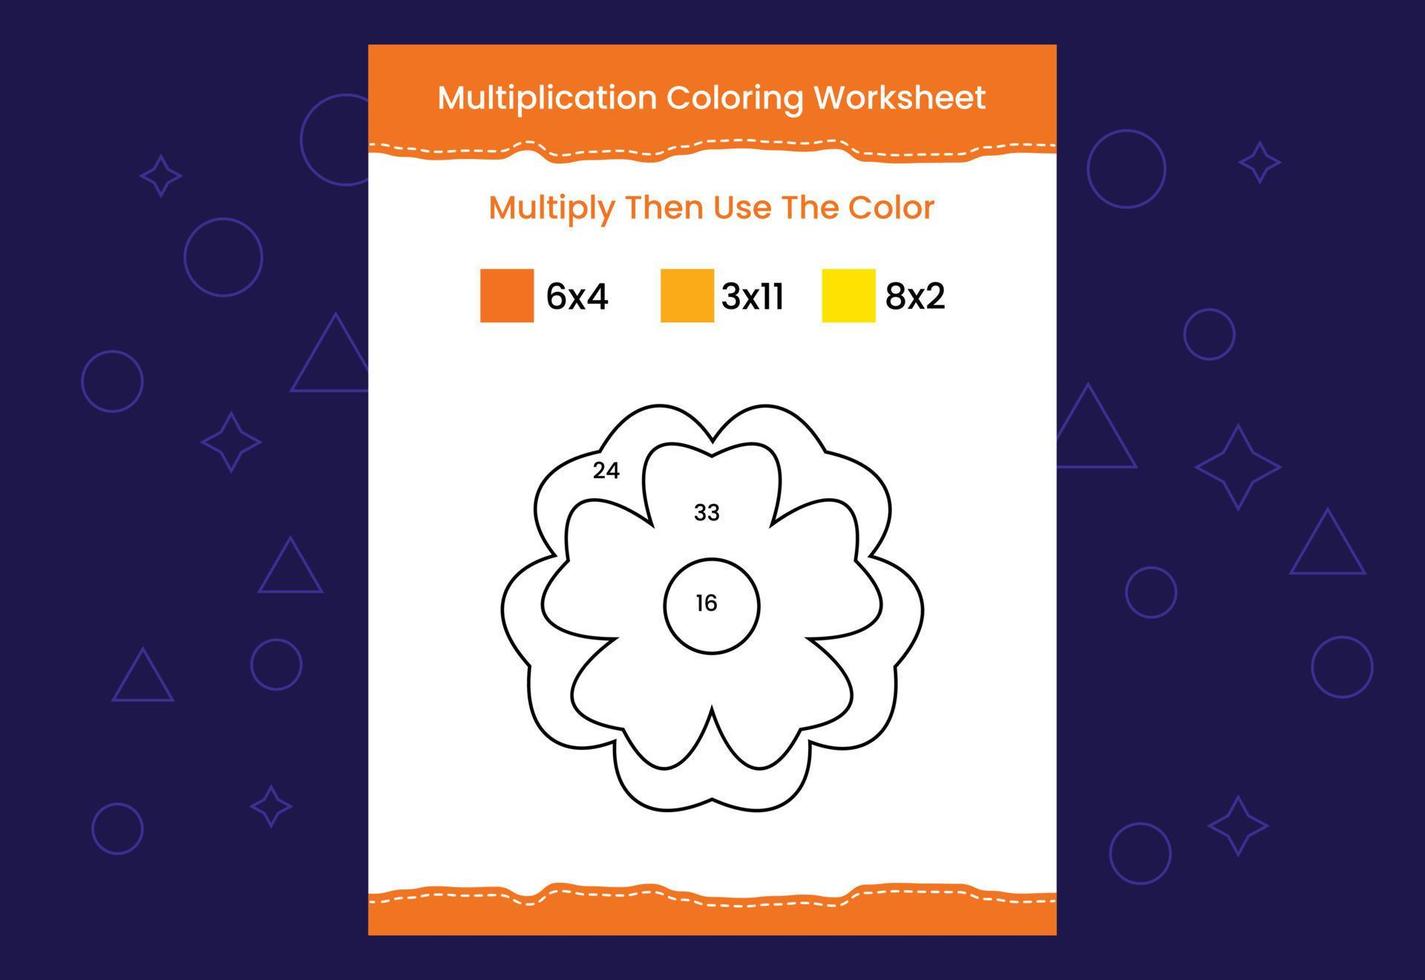 Multiplication Coloring worksheet with the image. Color by numbers math game vector